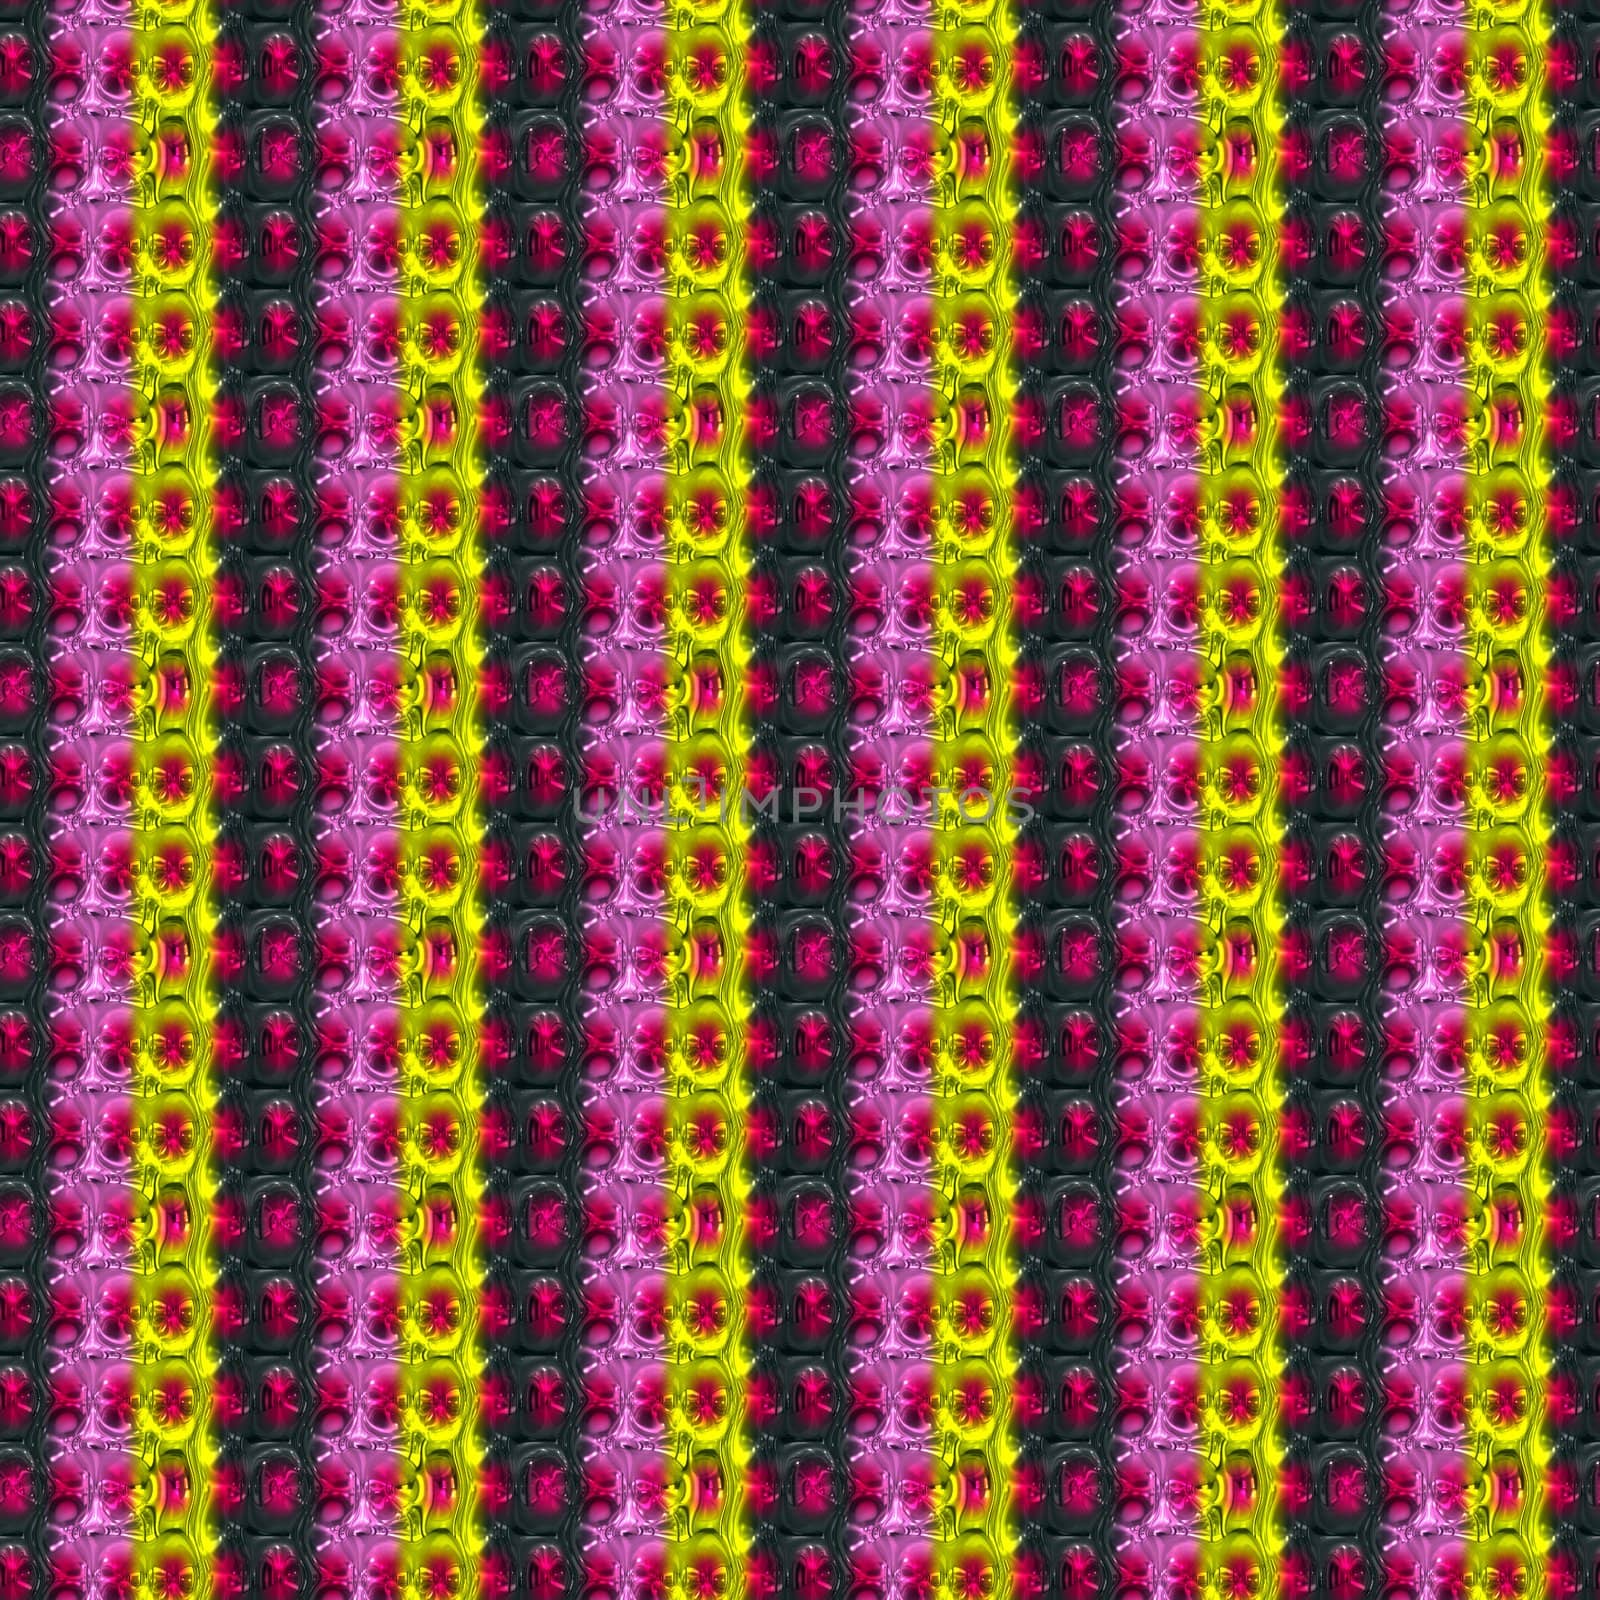 woven vertical lines pattern by weknow